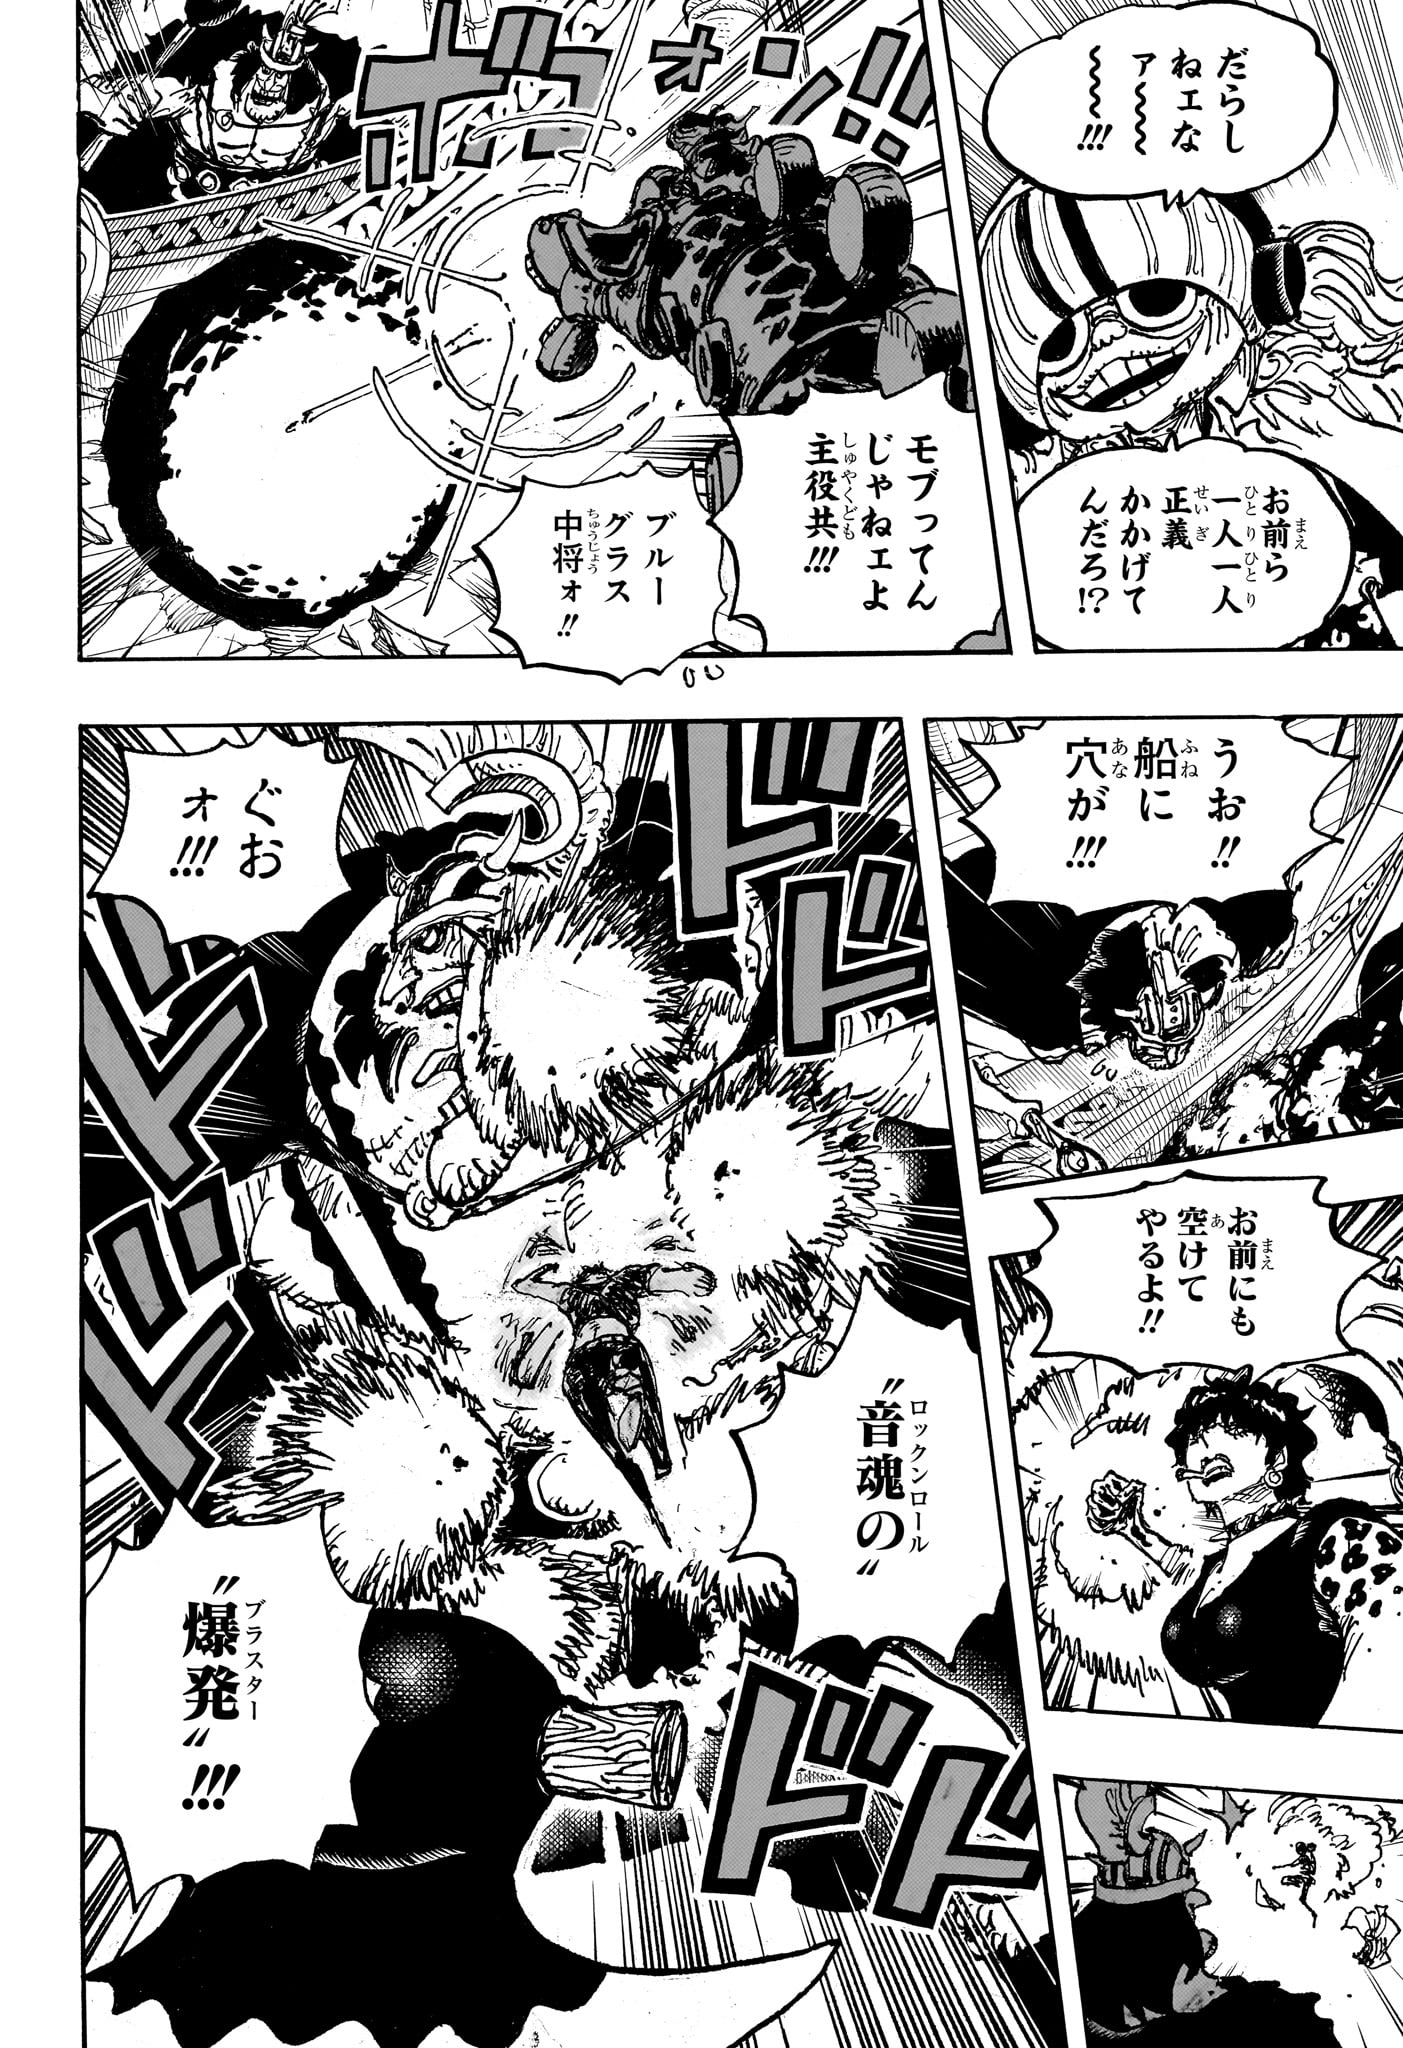 One Piece - Chapter 1117 - Page 12